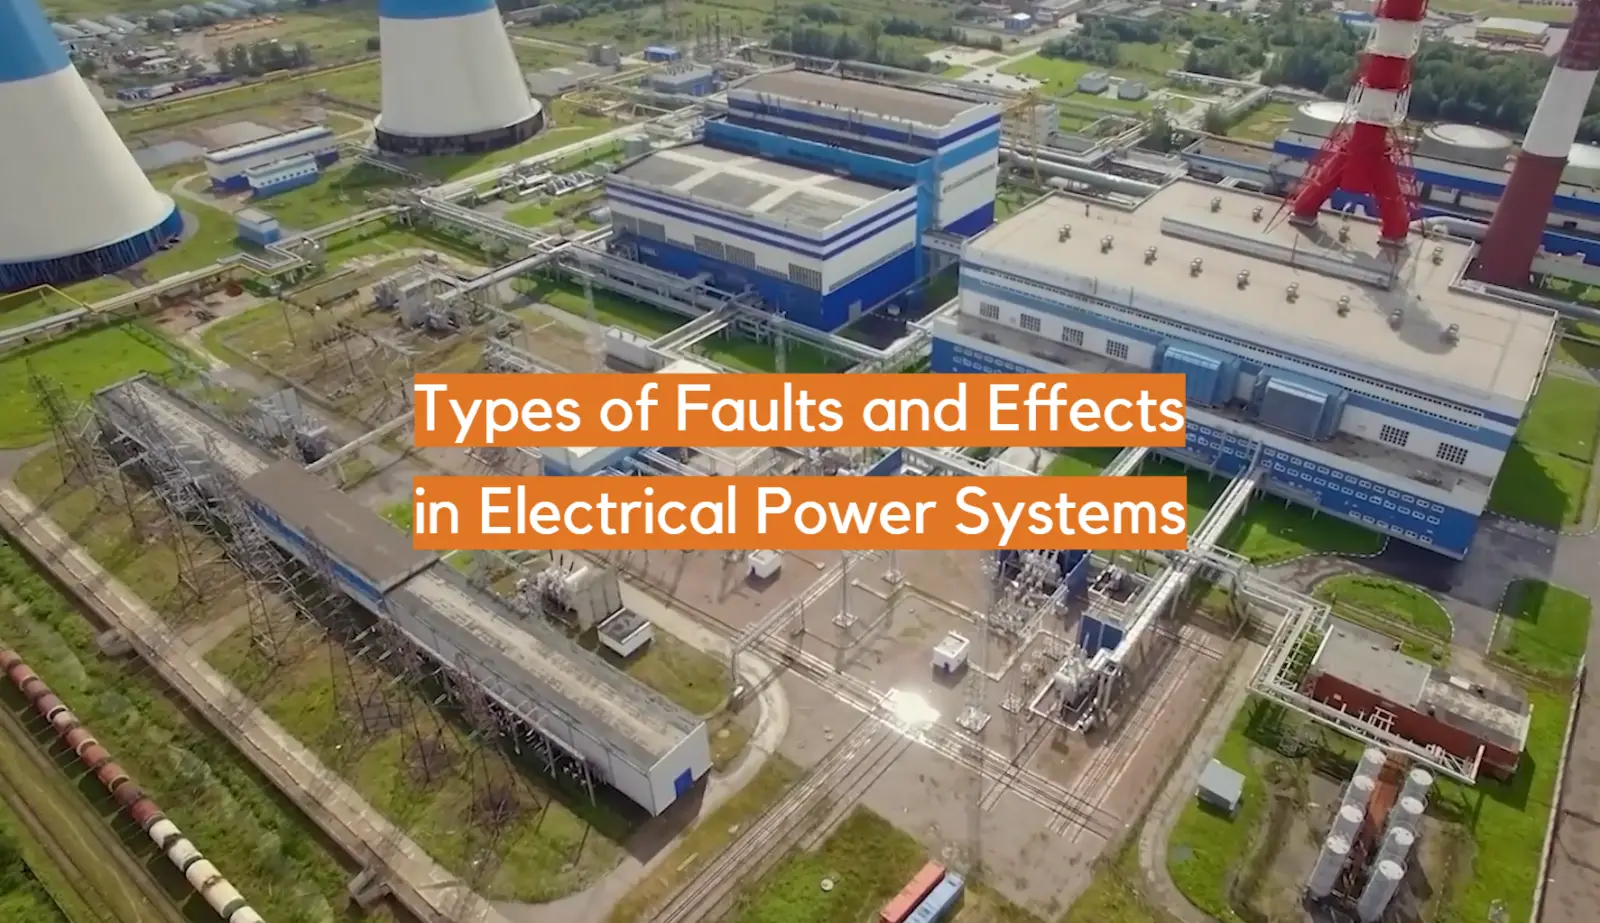 Types of Faults and Effects in Electrical Power Systems